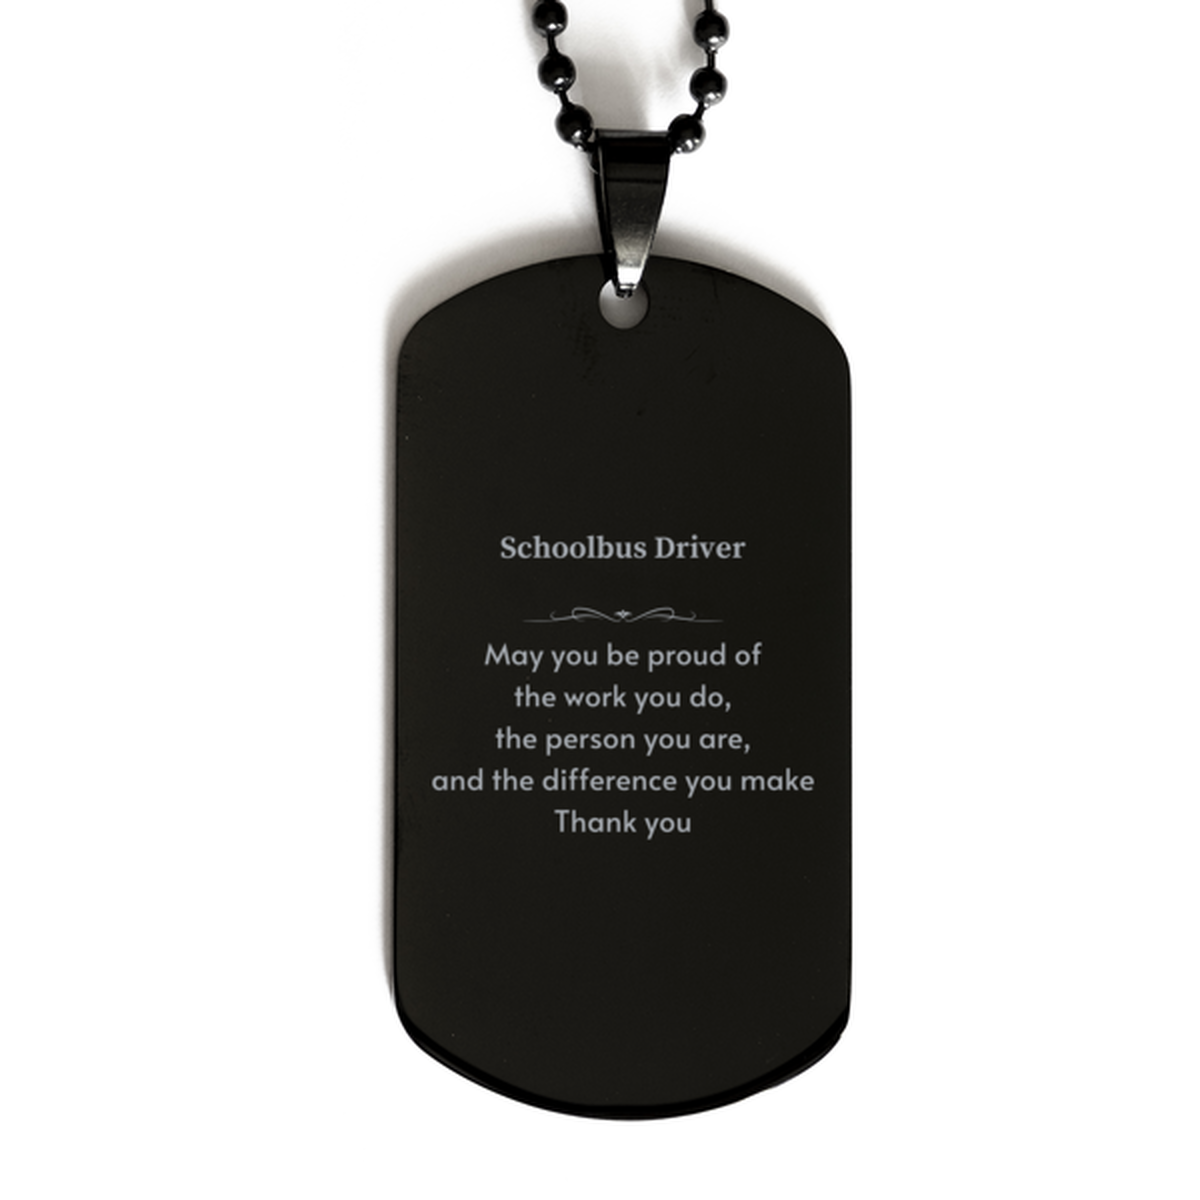 Heartwarming Black Dog Tag Retirement Coworkers Gifts for Schoolbus Driver, Schoolbus Driver May You be proud of the work you do, the person you are Gifts for Boss Men Women Friends